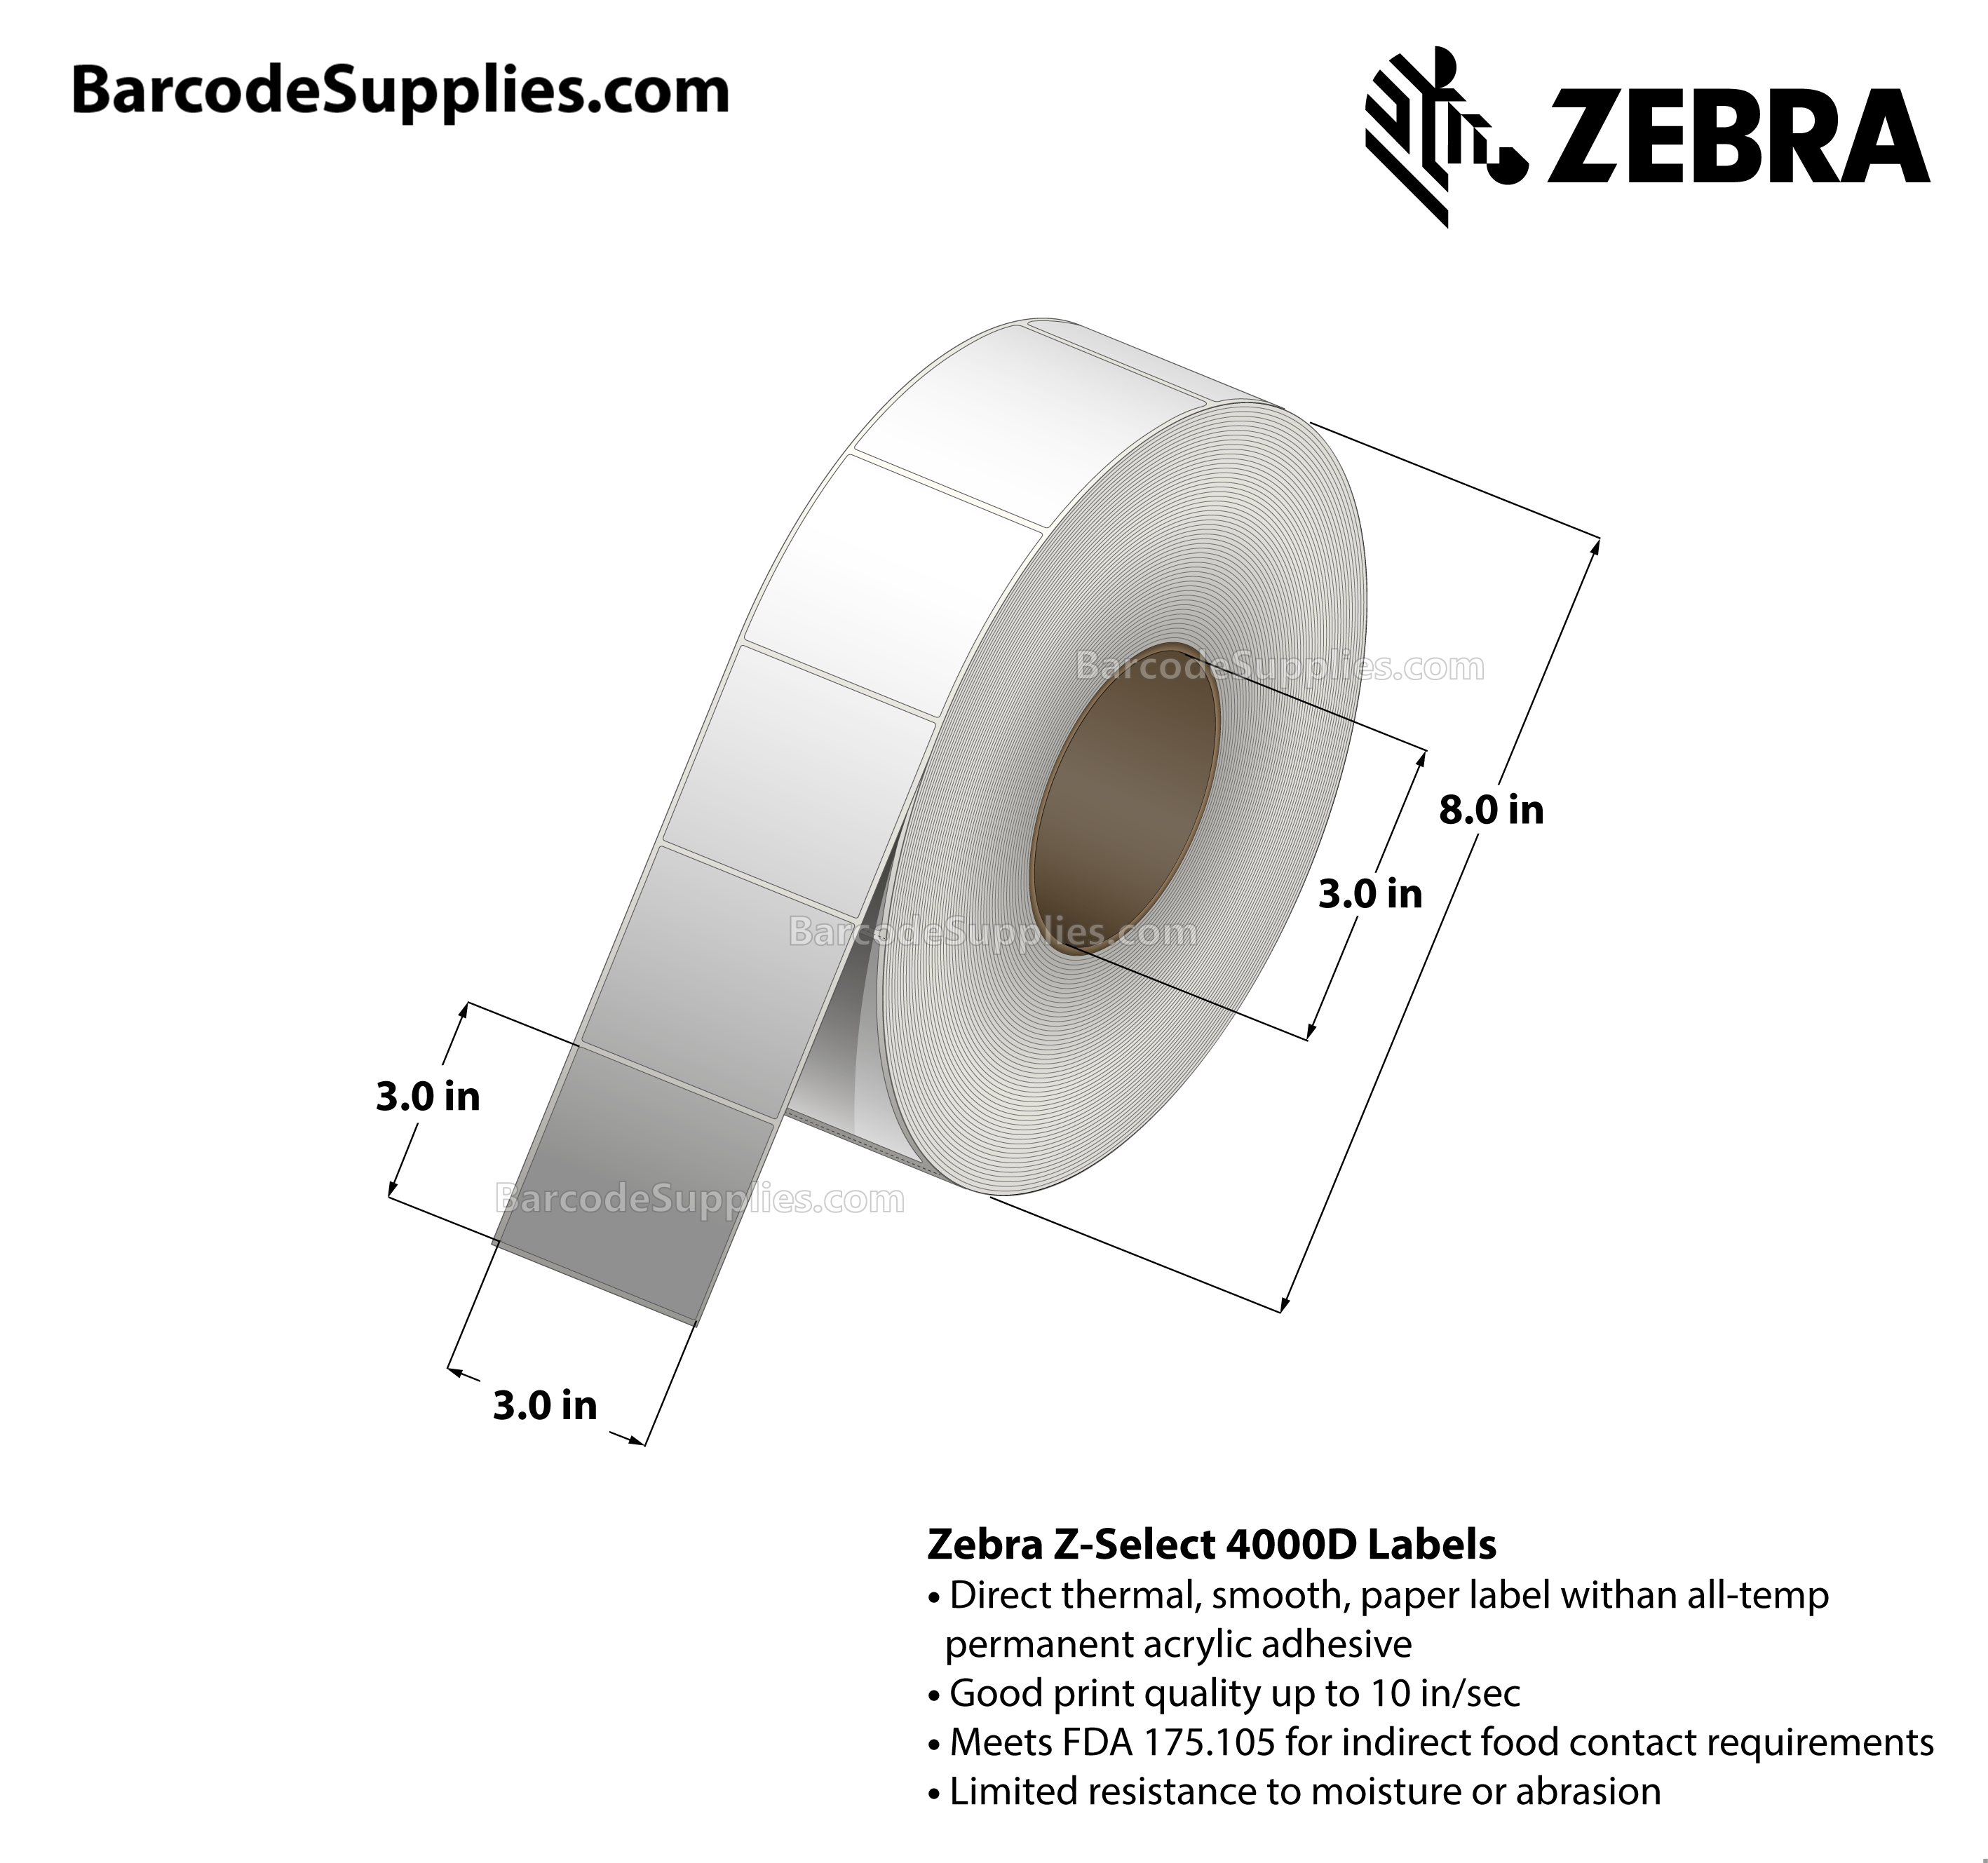 3 x 3 Direct Thermal White Z-Select 4000D Labels With All-Temp Adhesive - Not Perforated - 1840 Labels Per Roll - Carton Of 6 Rolls - 11040 Labels Total - MPN: 84086